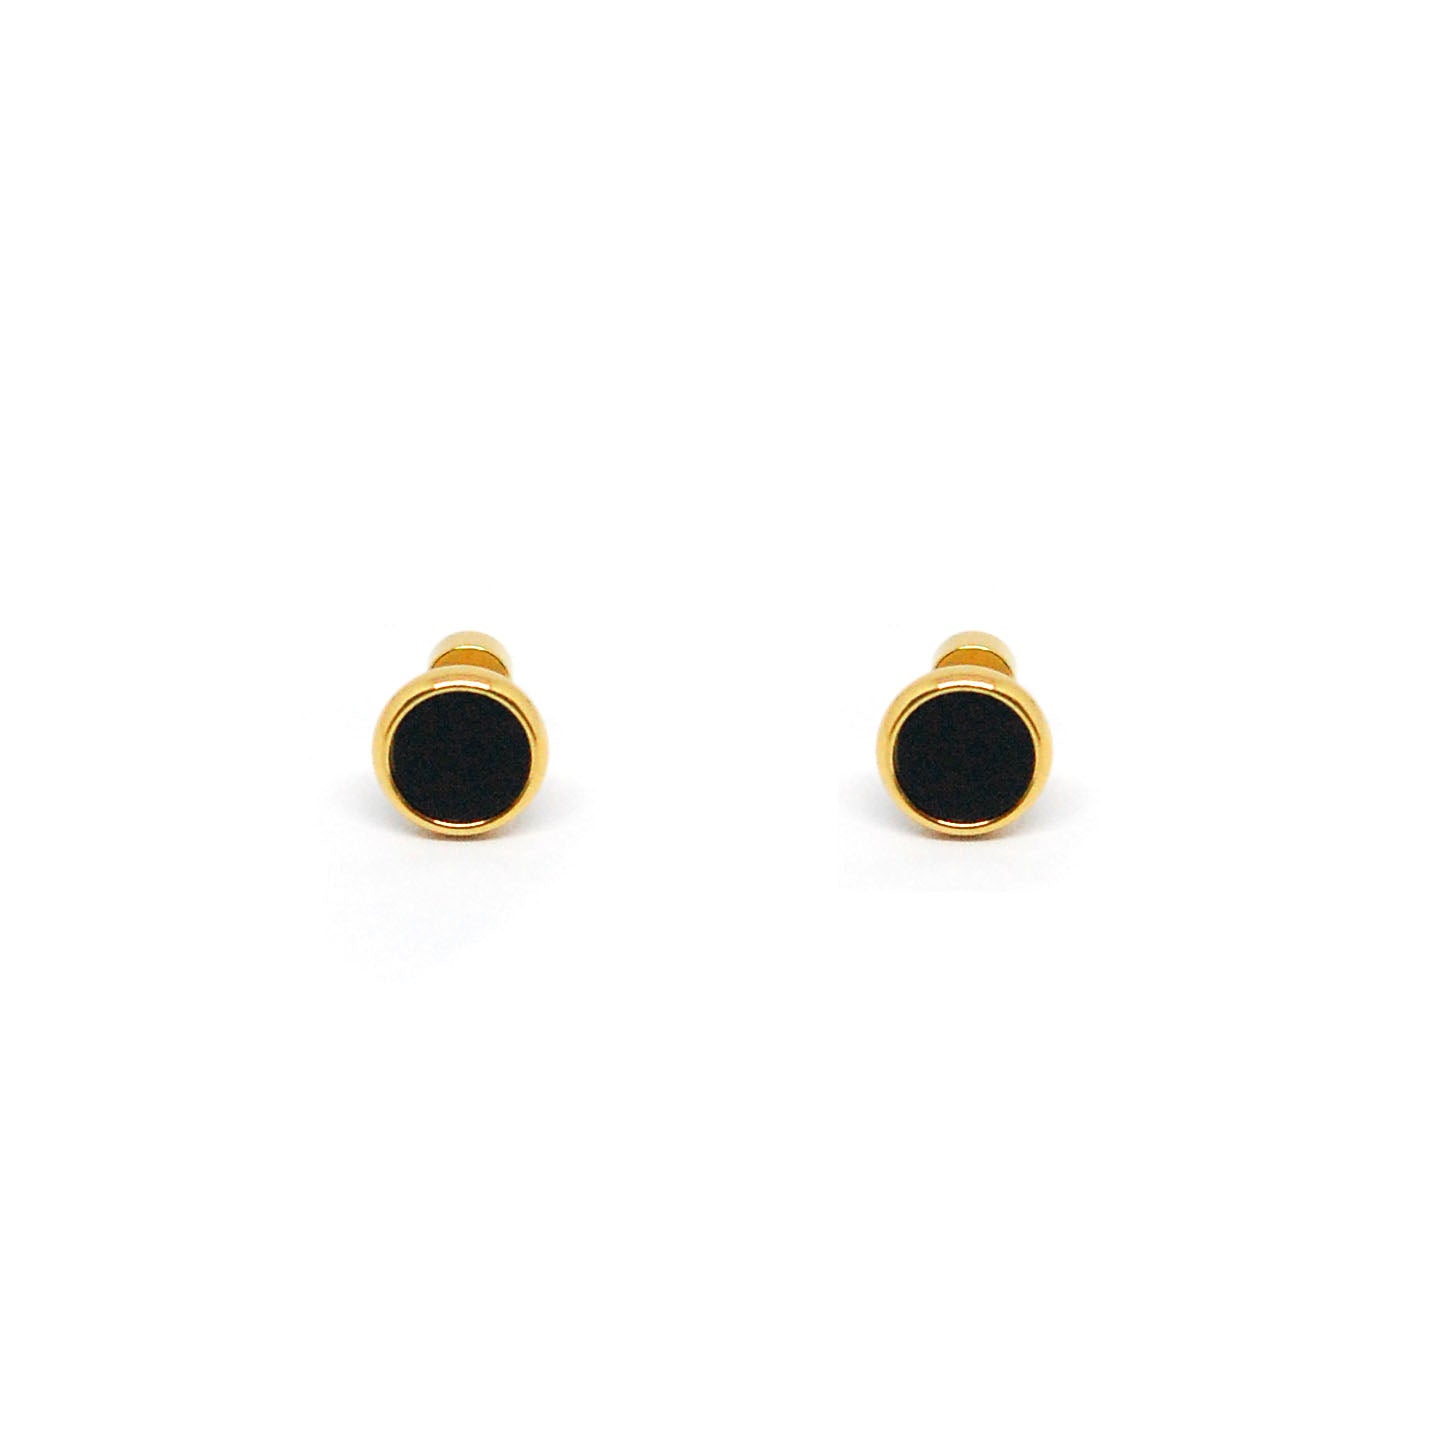 ESE 8078: All IPG Enclosed 6mm Black Studs w/ Baby Safe Chapita